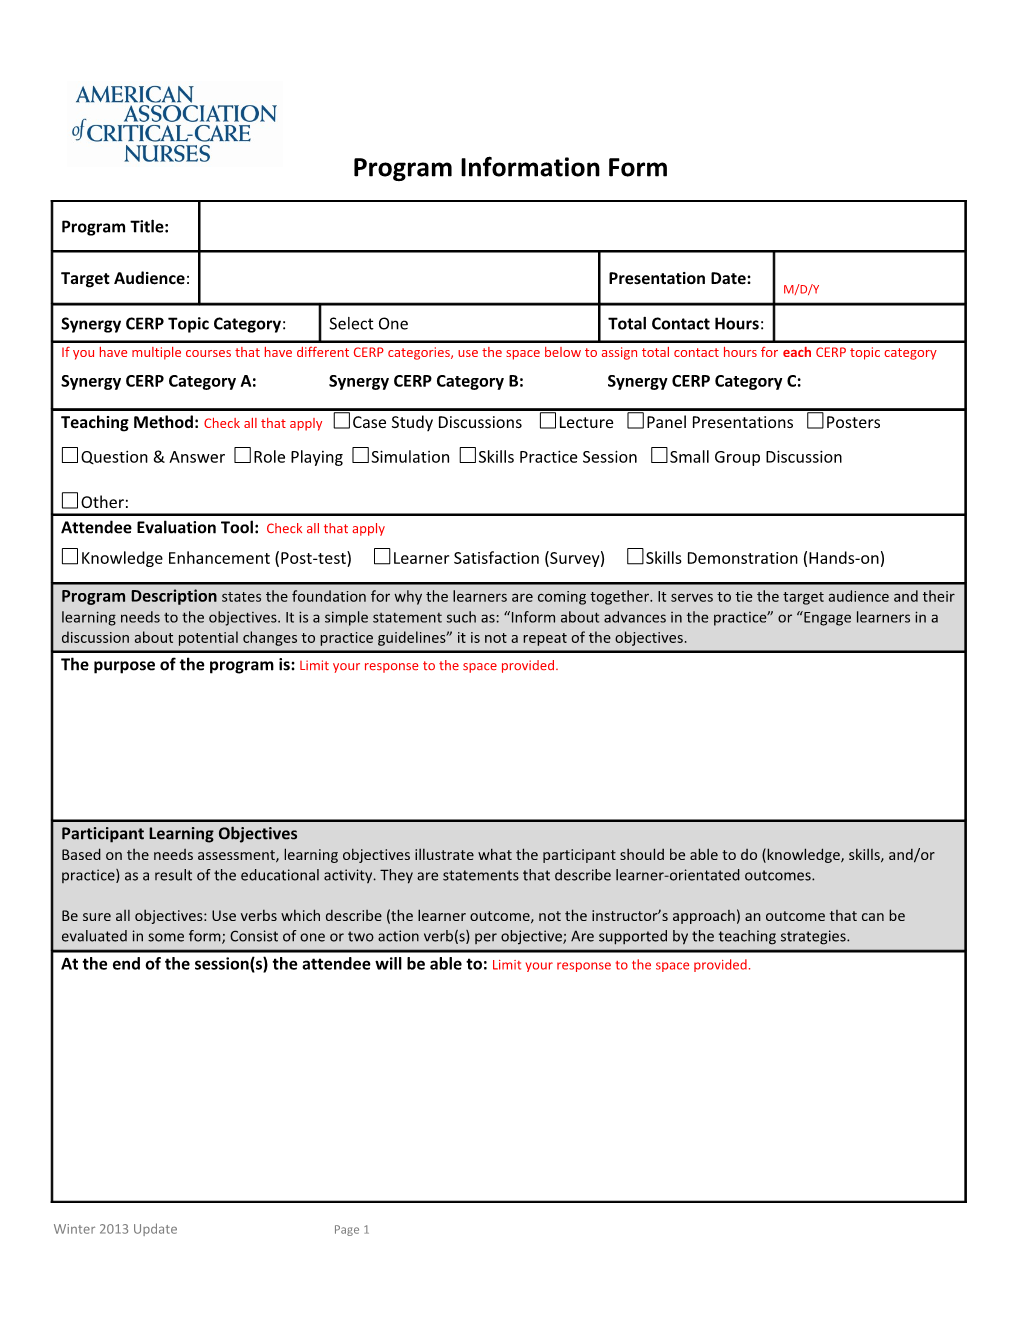 AACN CNE Program Approval Application Cover Sheet